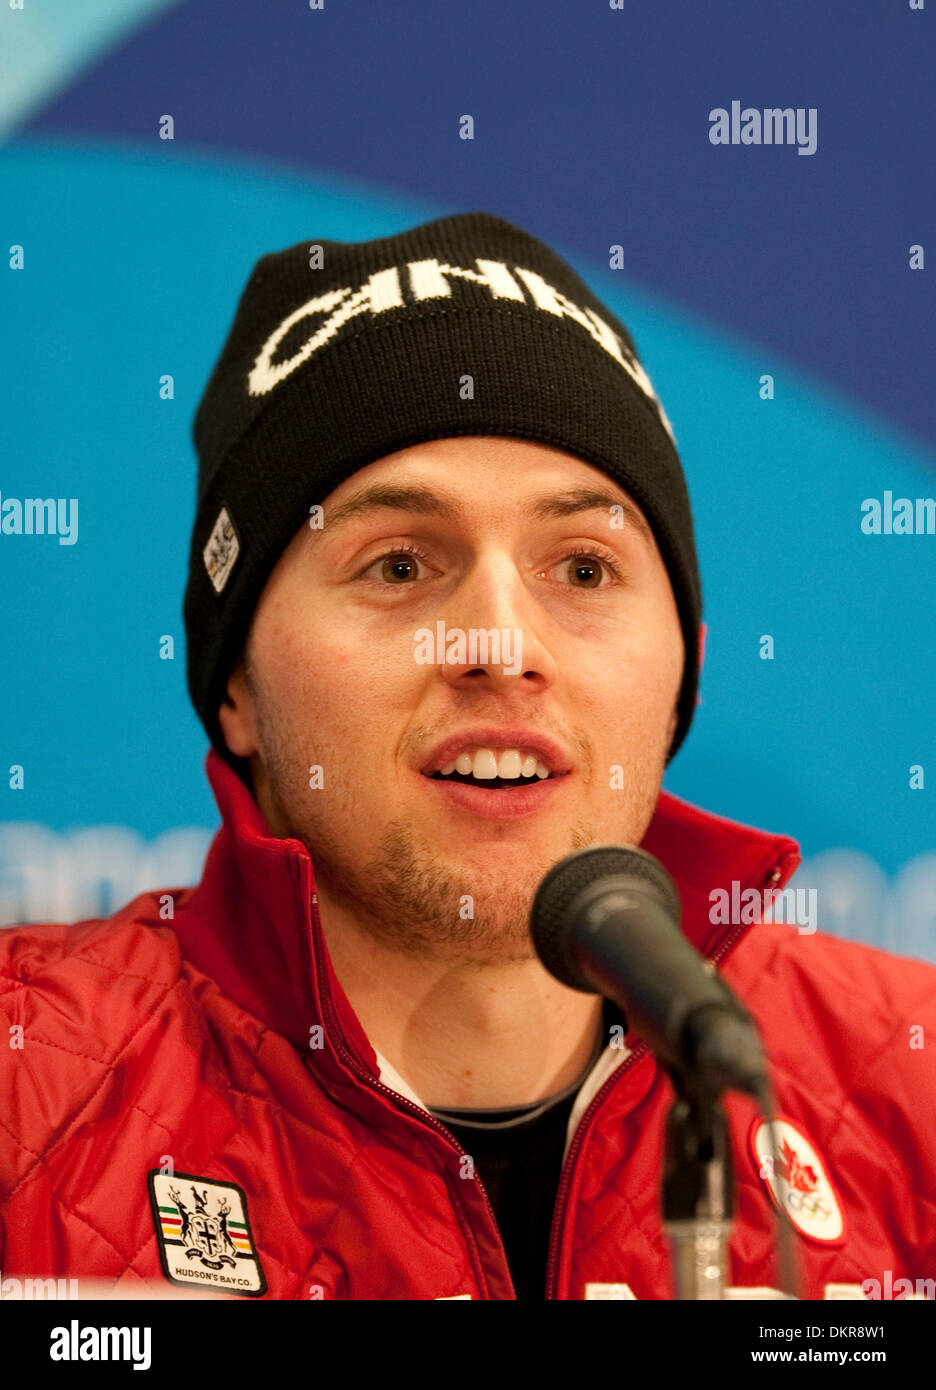 Feb 14, 2010 - Vancouver, British Columbia, Canada - Canada's ALEXANDRE BILODEAU won the men's moguls freestyle skiing title on Sunday, claiming the host nation's first gold medal of the Games and ending a long-running jinx. Bilodeau scored 26.75 points. Bilodeau won the men's moguls freestyle skiing title on Sunday, claiming the host nation's first gold medal of the Games and endi Stock Photo